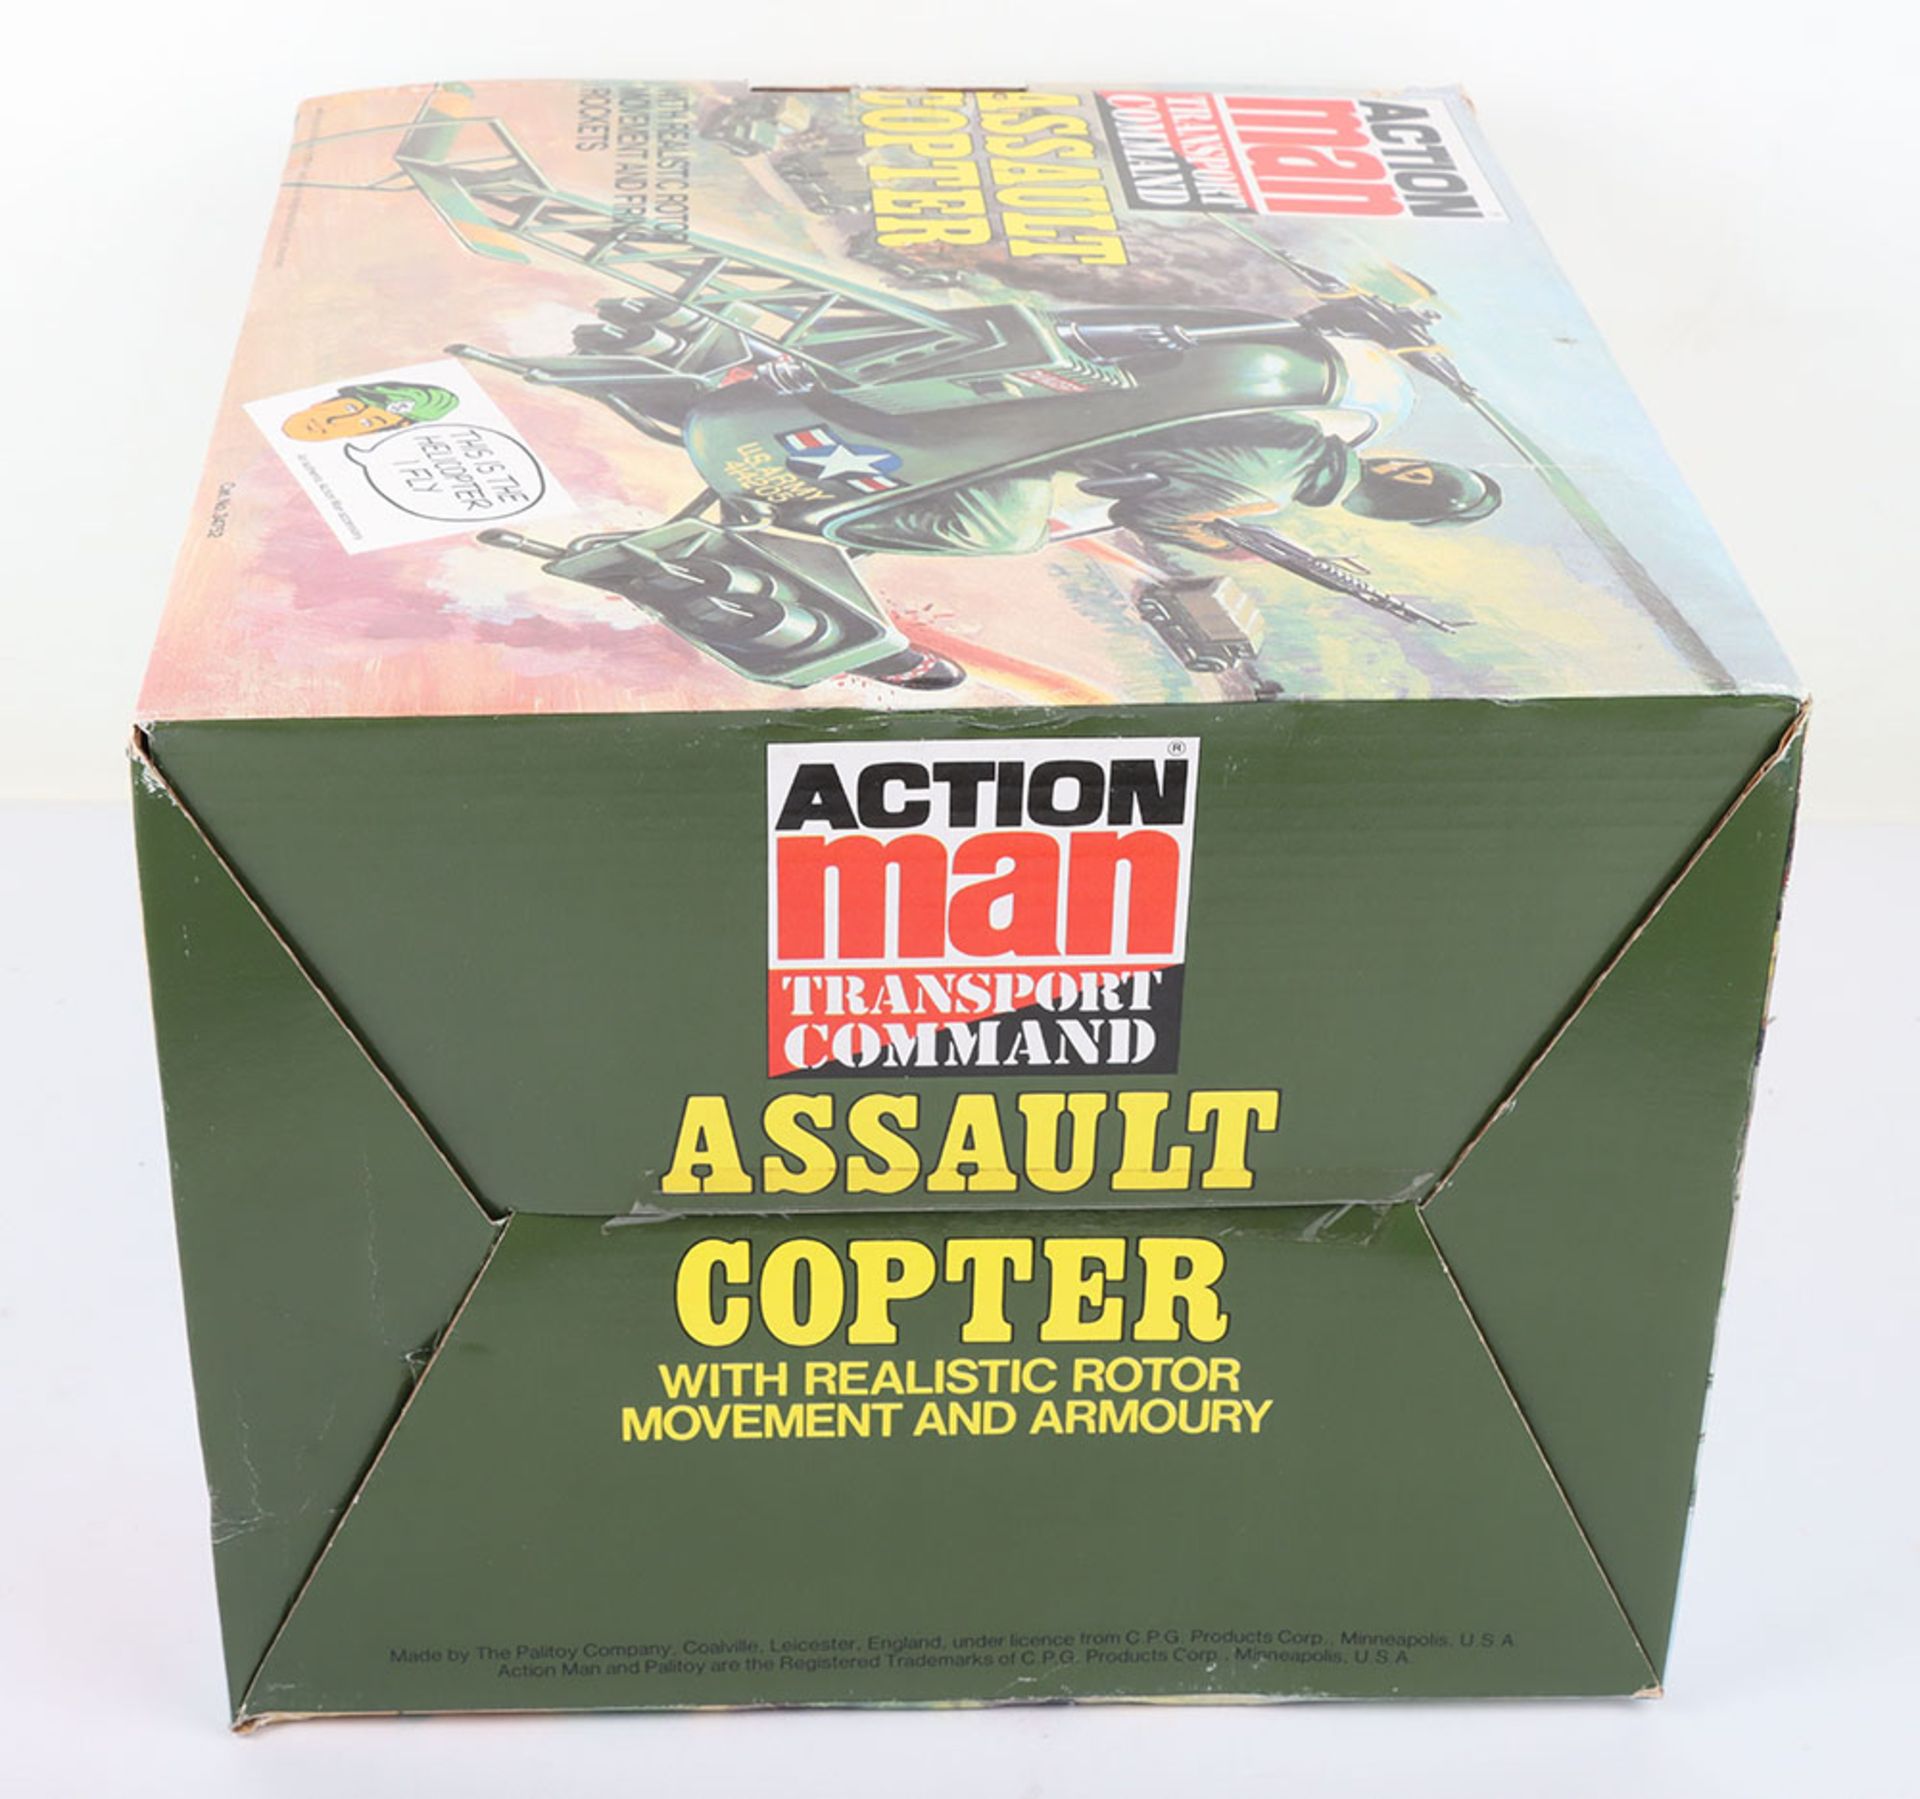 Palitoy Action Man Transport Command Assault Copter - Image 4 of 4